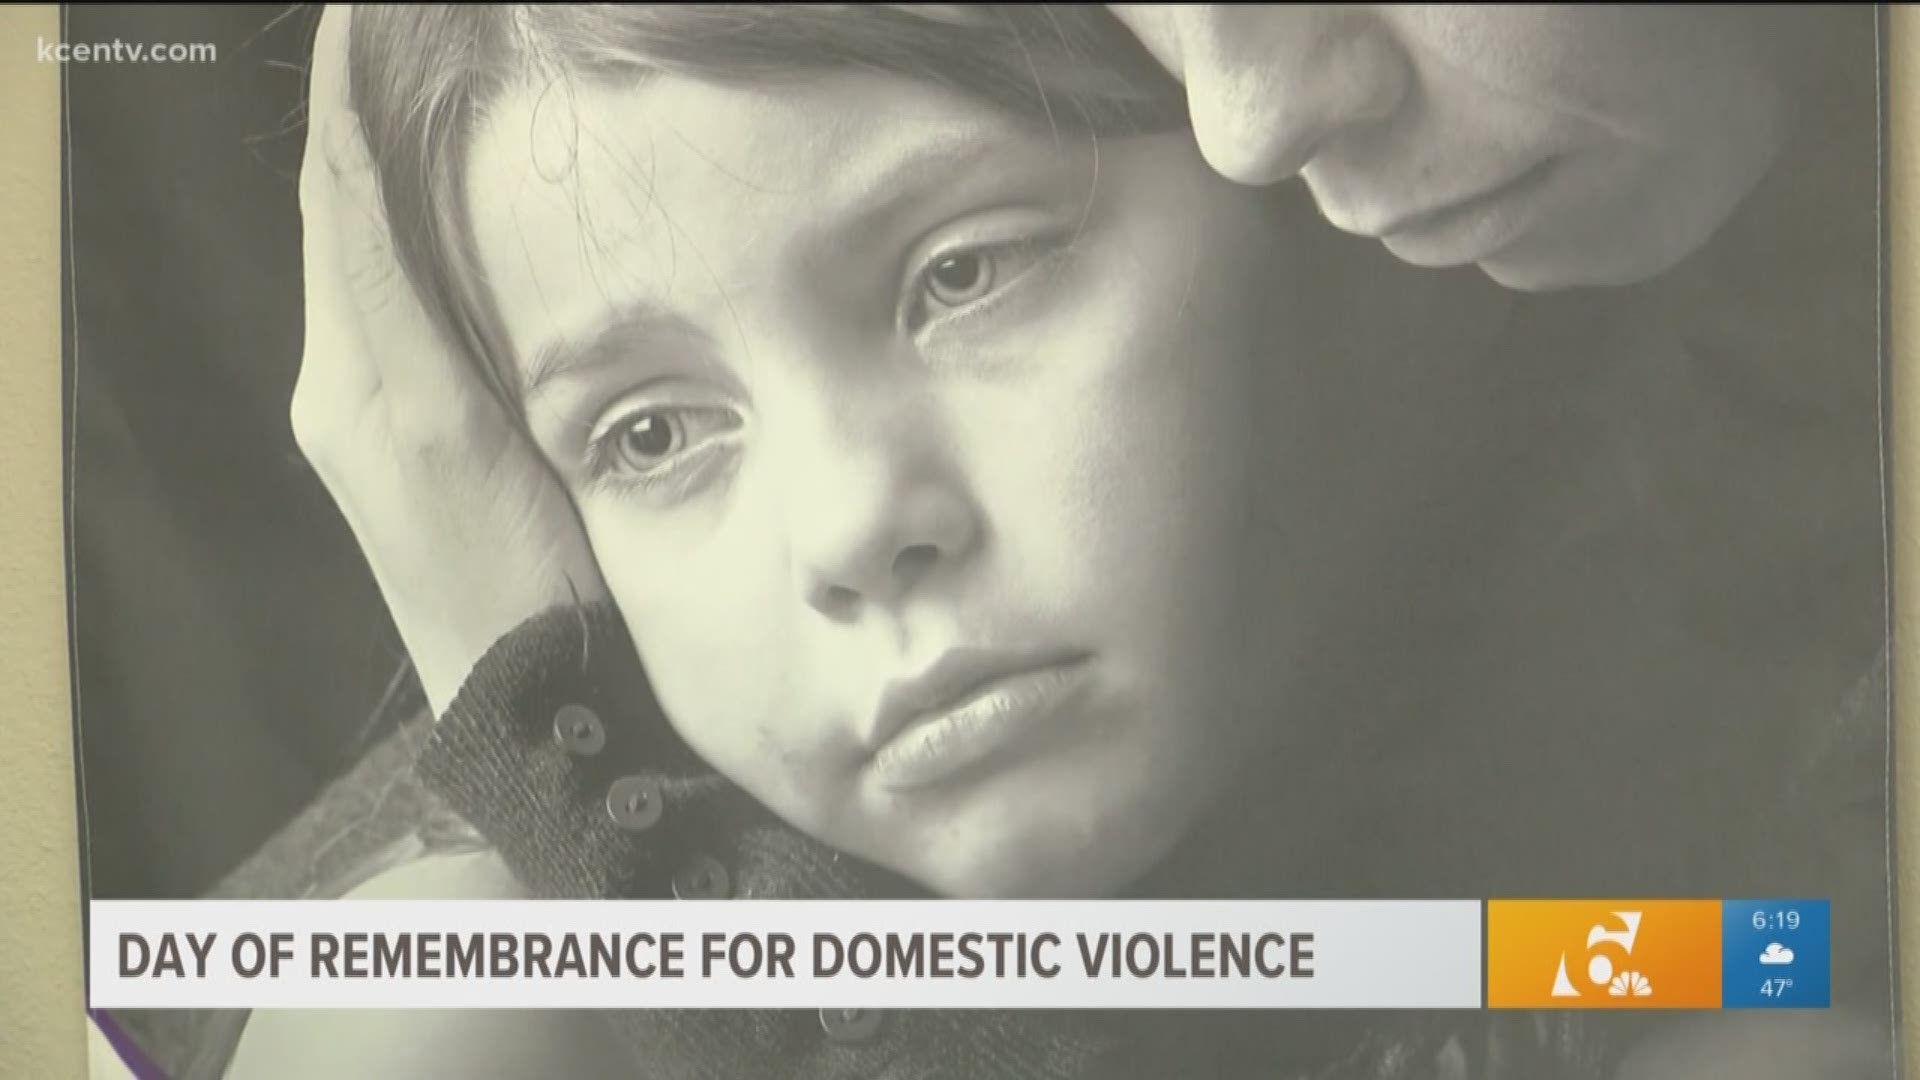 The Family Abuse Center in Waco is having a service to remember all victims who have died as a result of domestic violence in Texas, The event takes place at the Waco Suspension Bridge Tuesday night at 6:30 p.m.